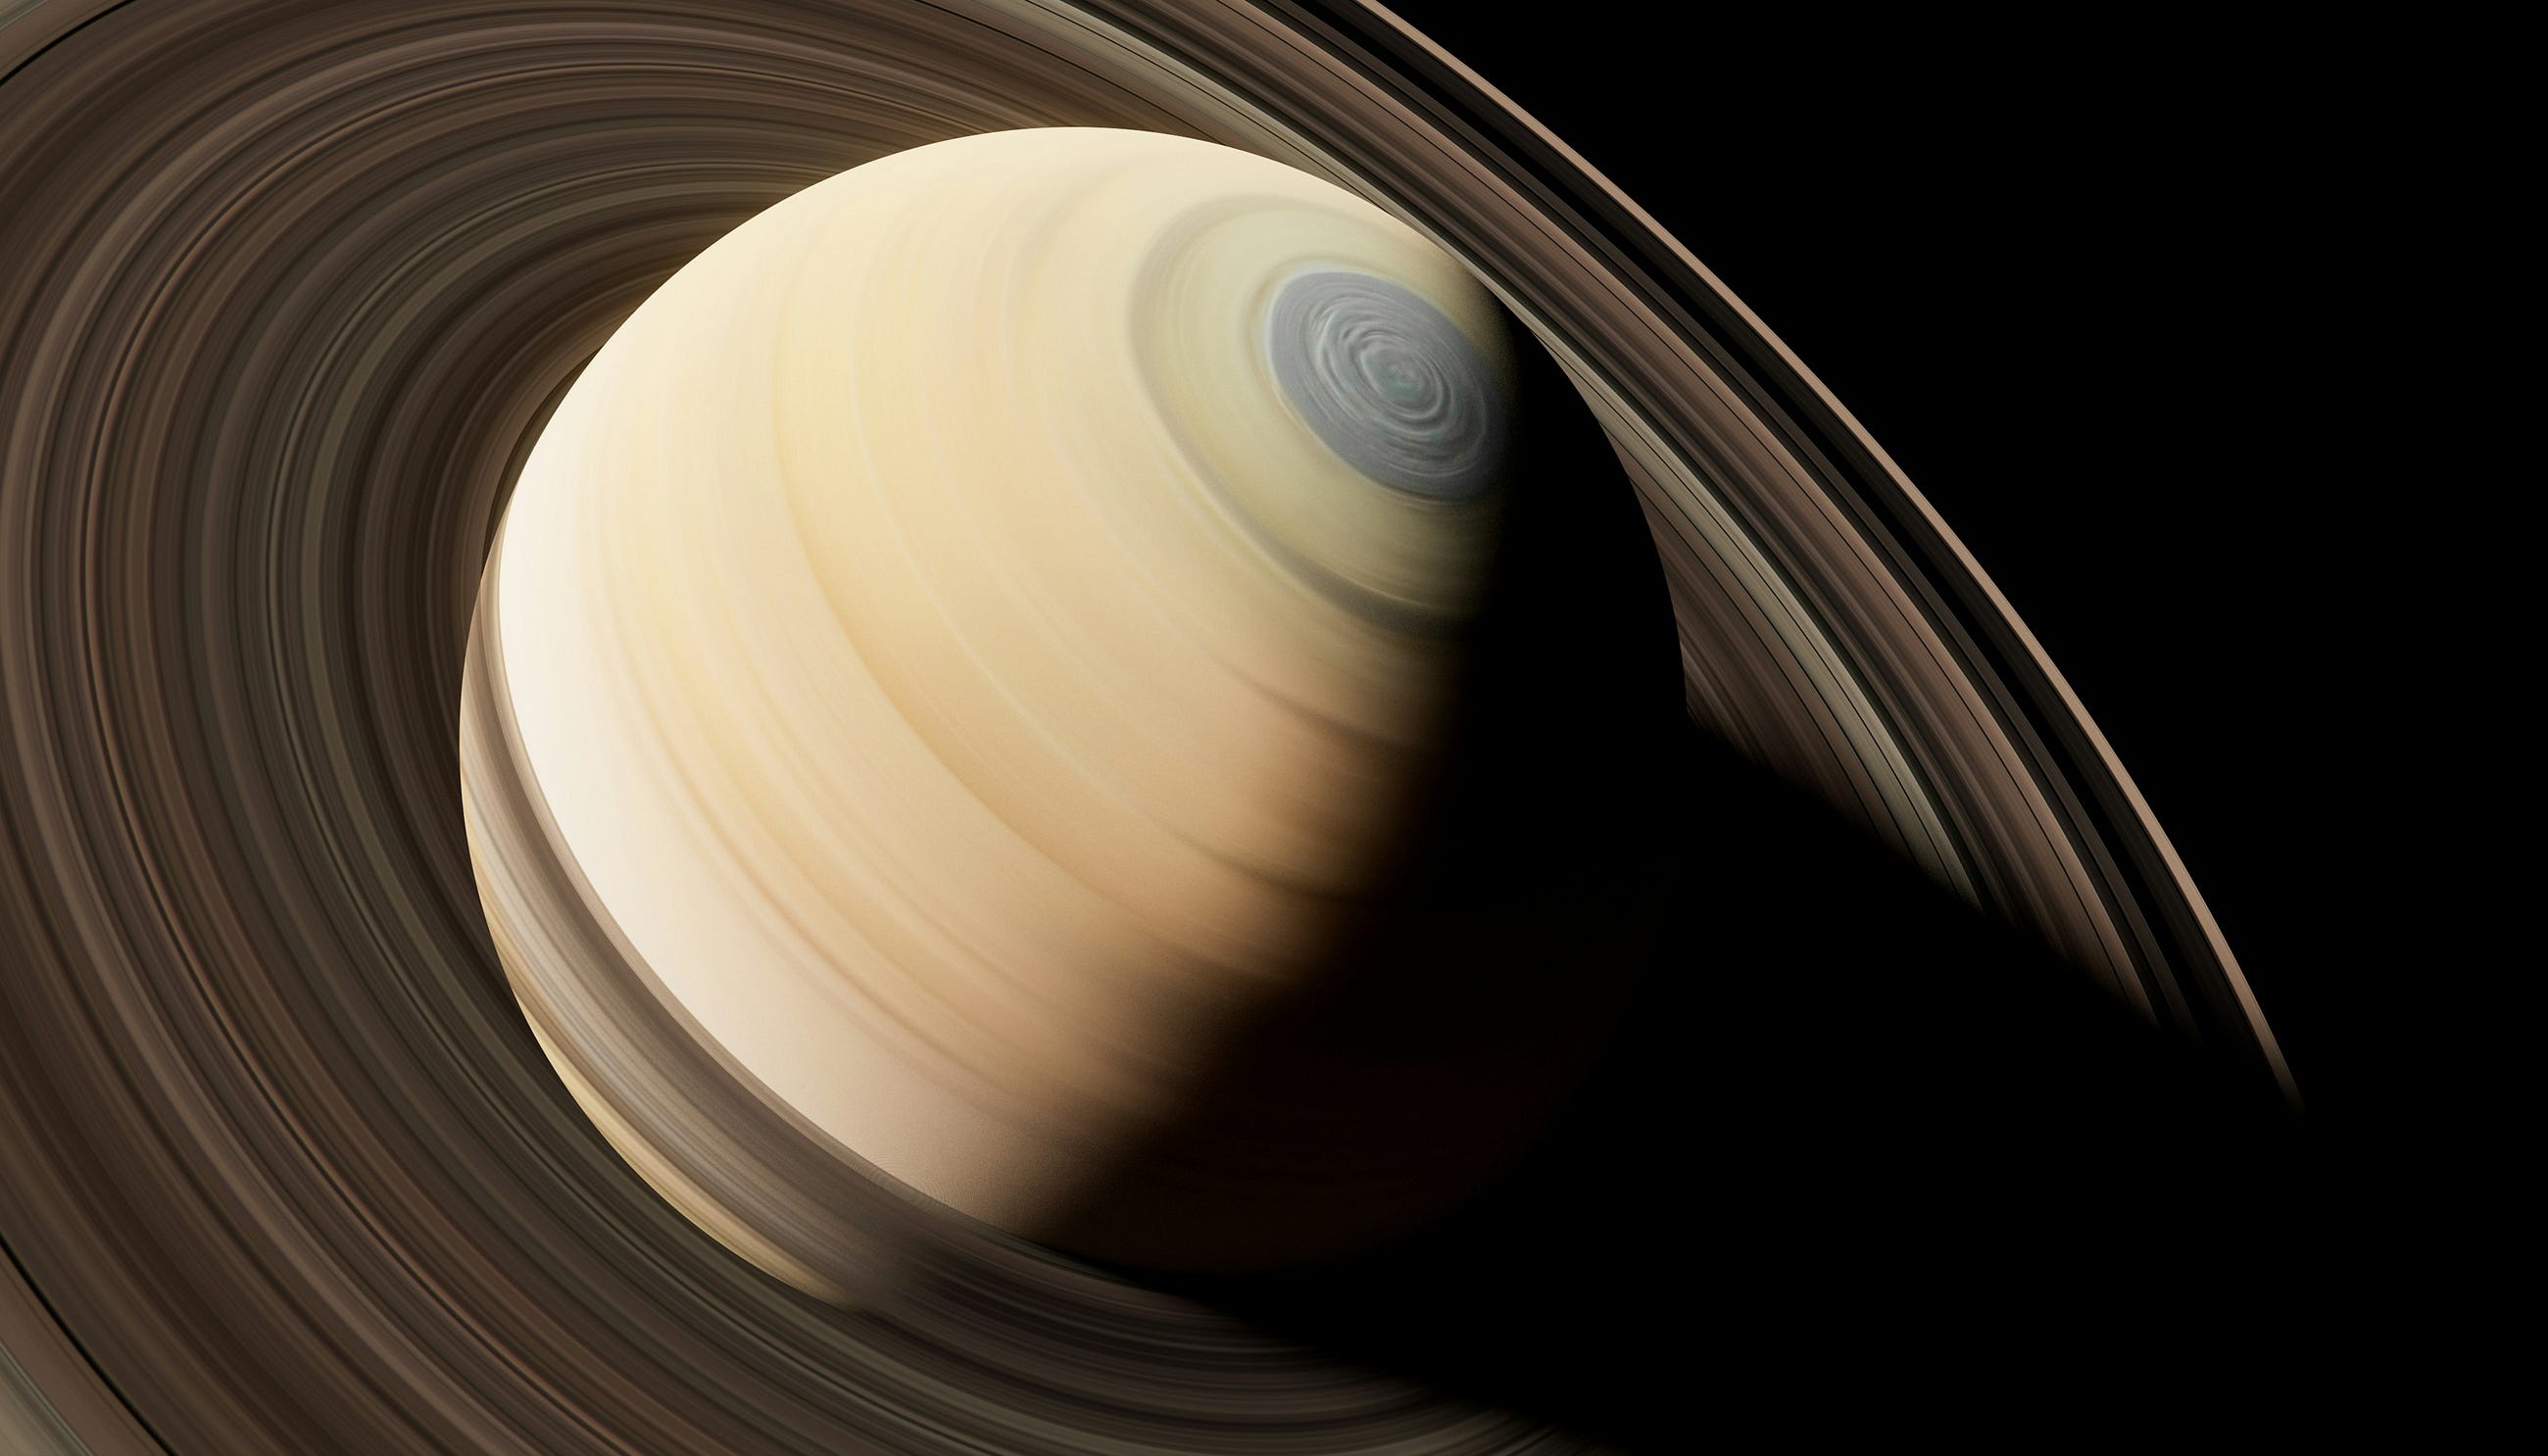 Saturn: The Majestic Giant of Our Solar System